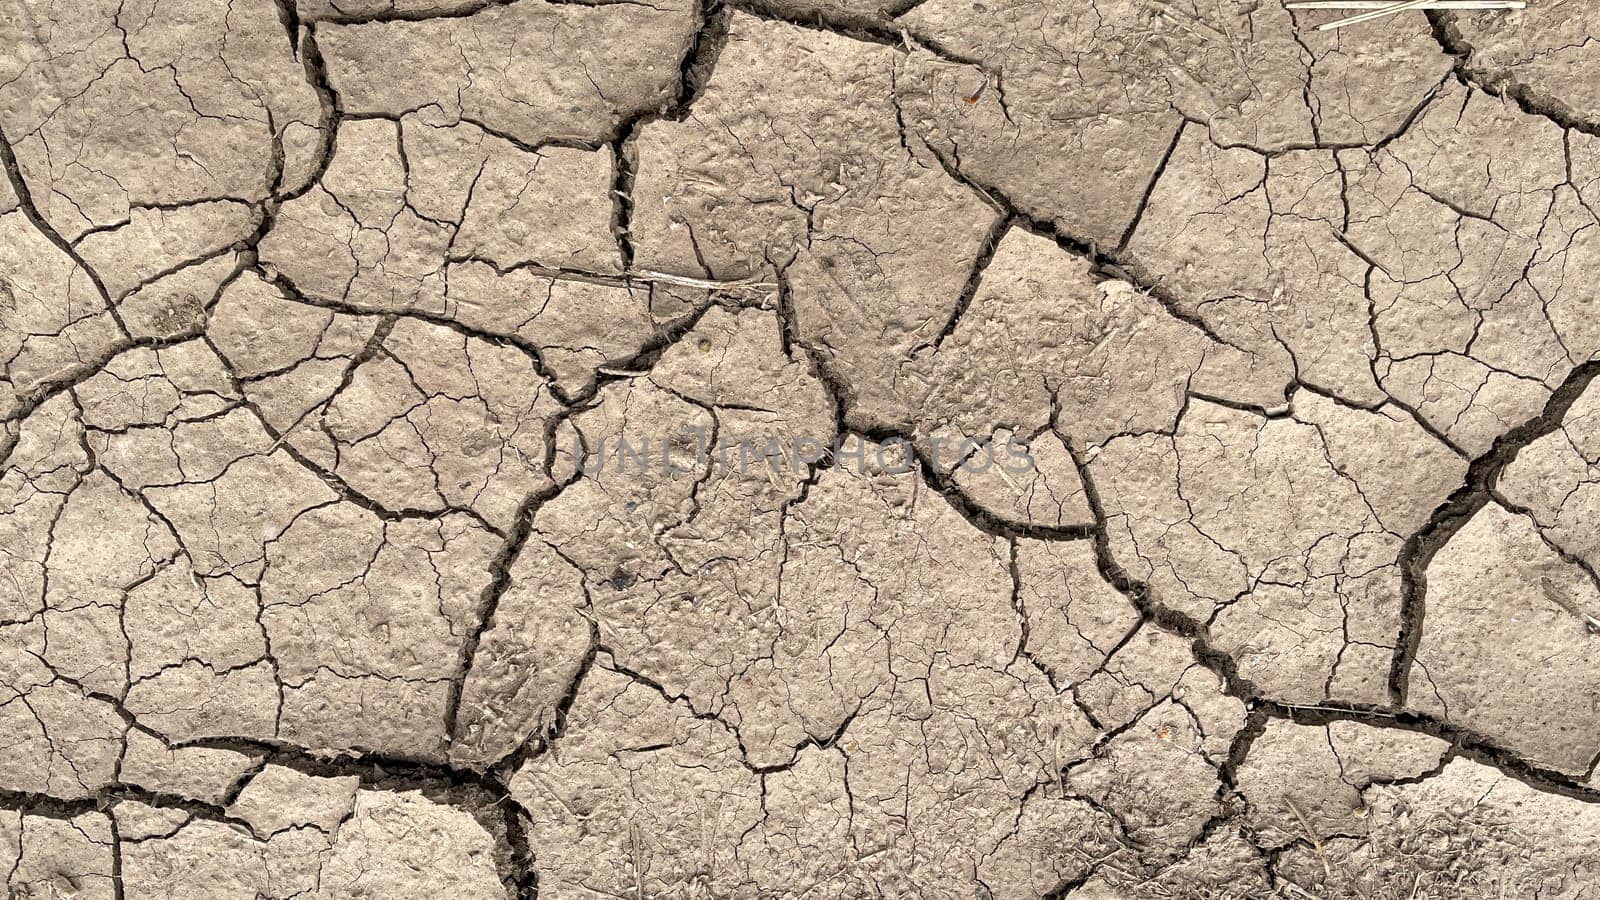 the texture of dry cracked earth by KCreeper